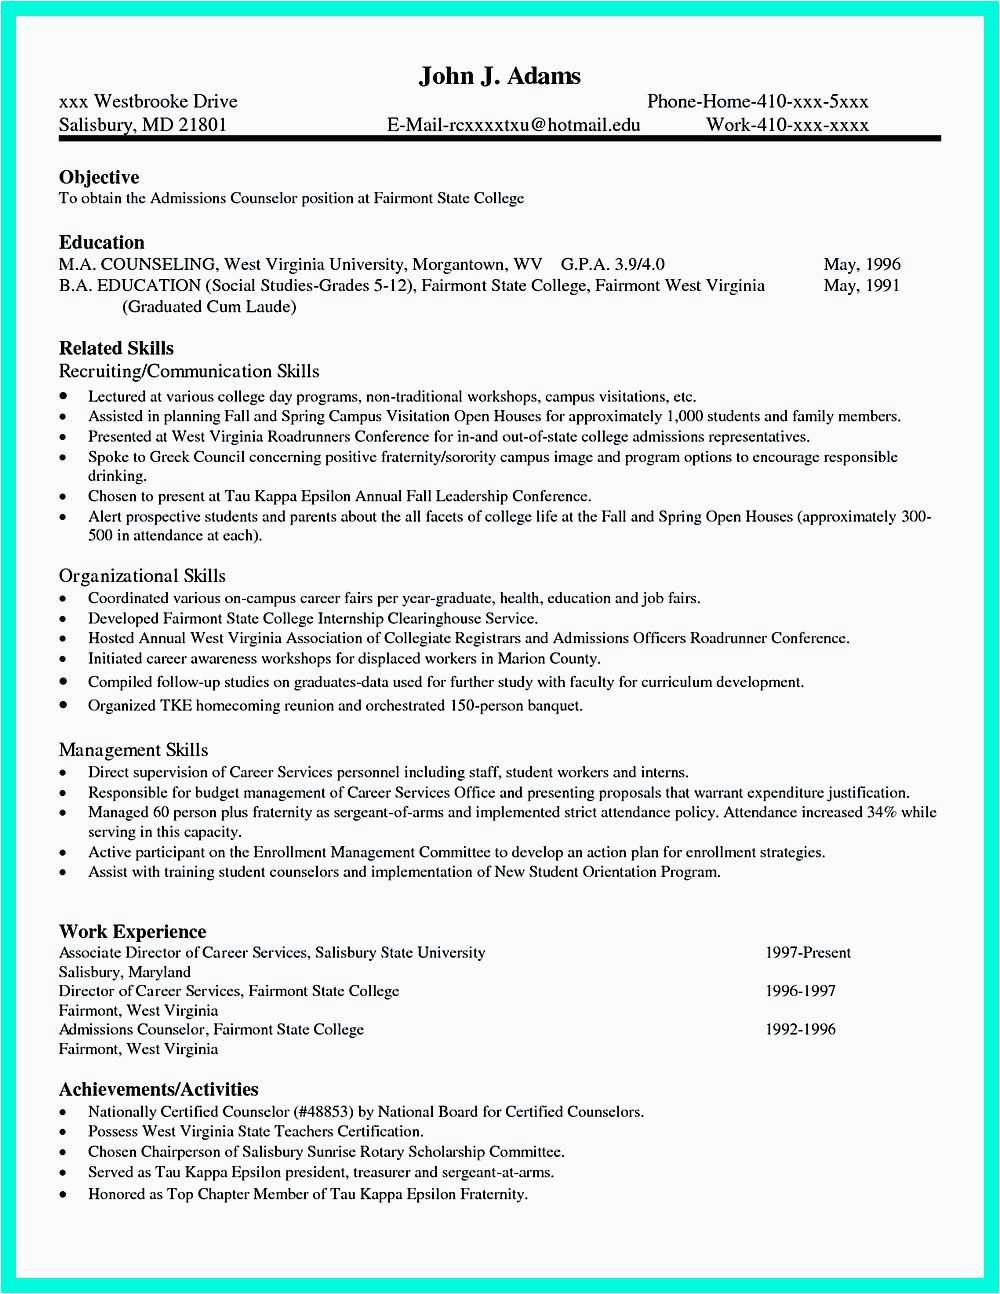 Sample Resume Objective for College Application Write Properly Your Ac Plishments In College Application